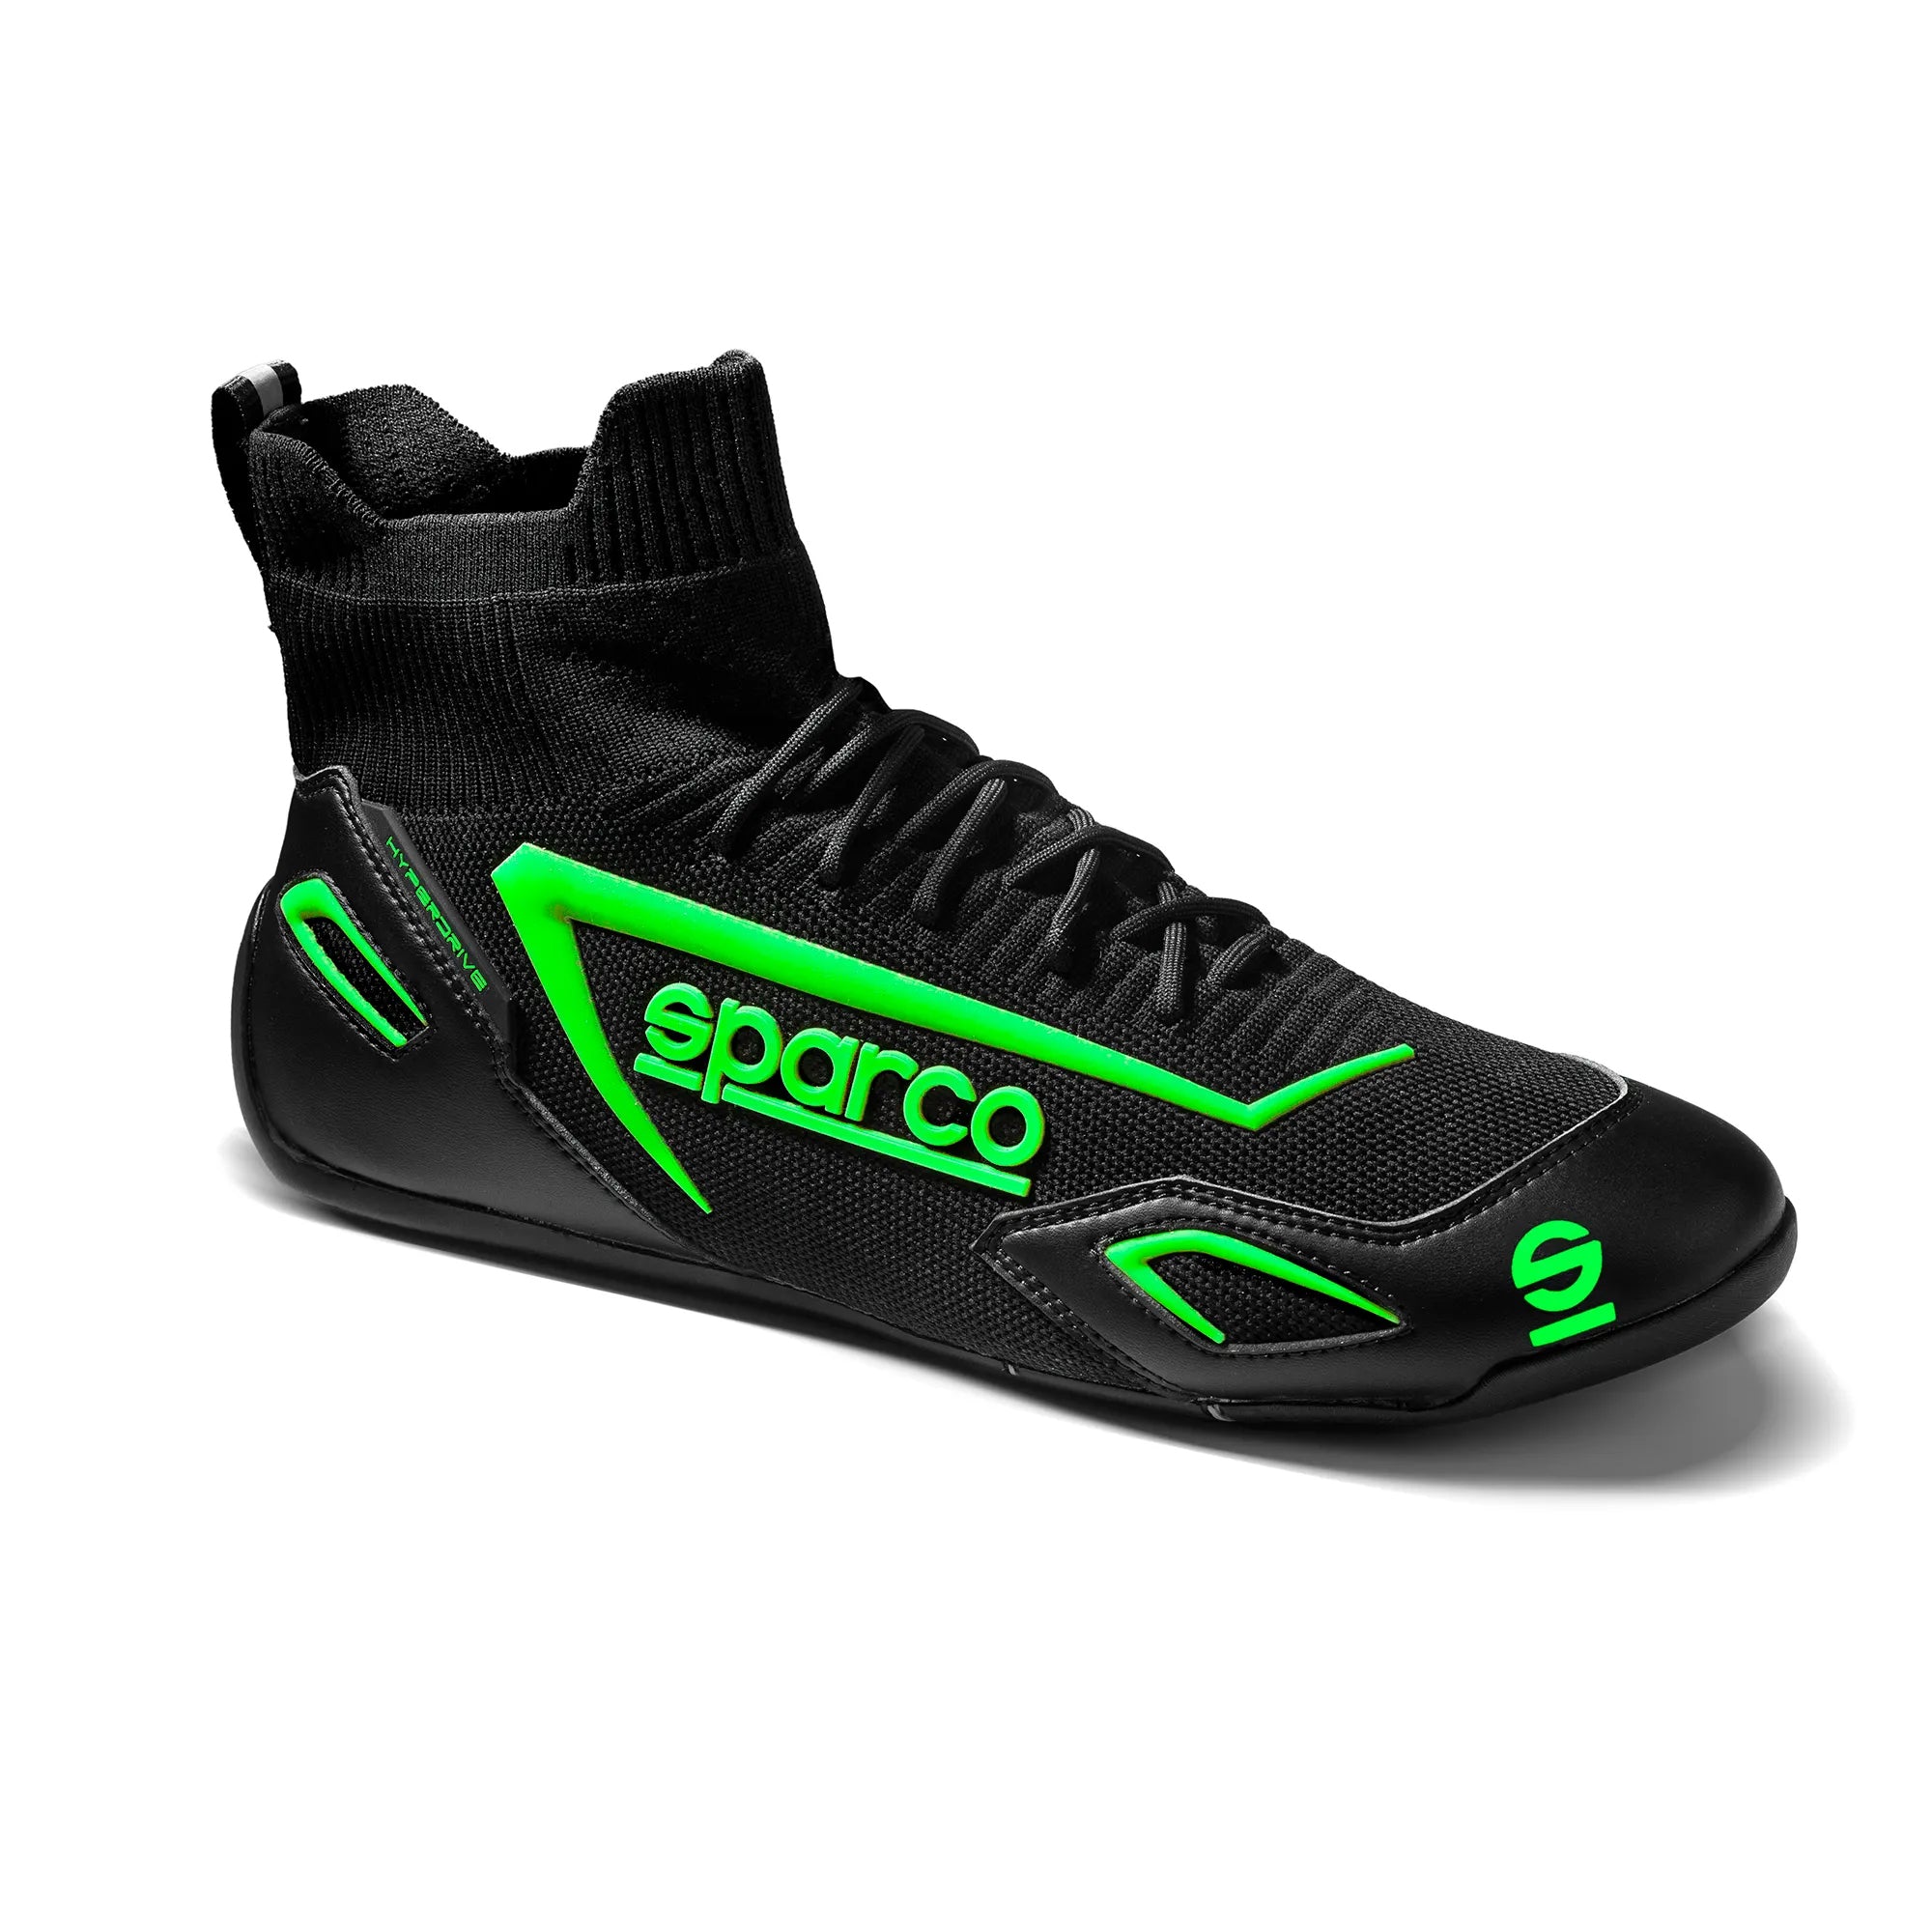 SPARCO 00129343NRVF Gaming sim racing shoes HYPERDRIVE, black/green, size 43 Photo-1 